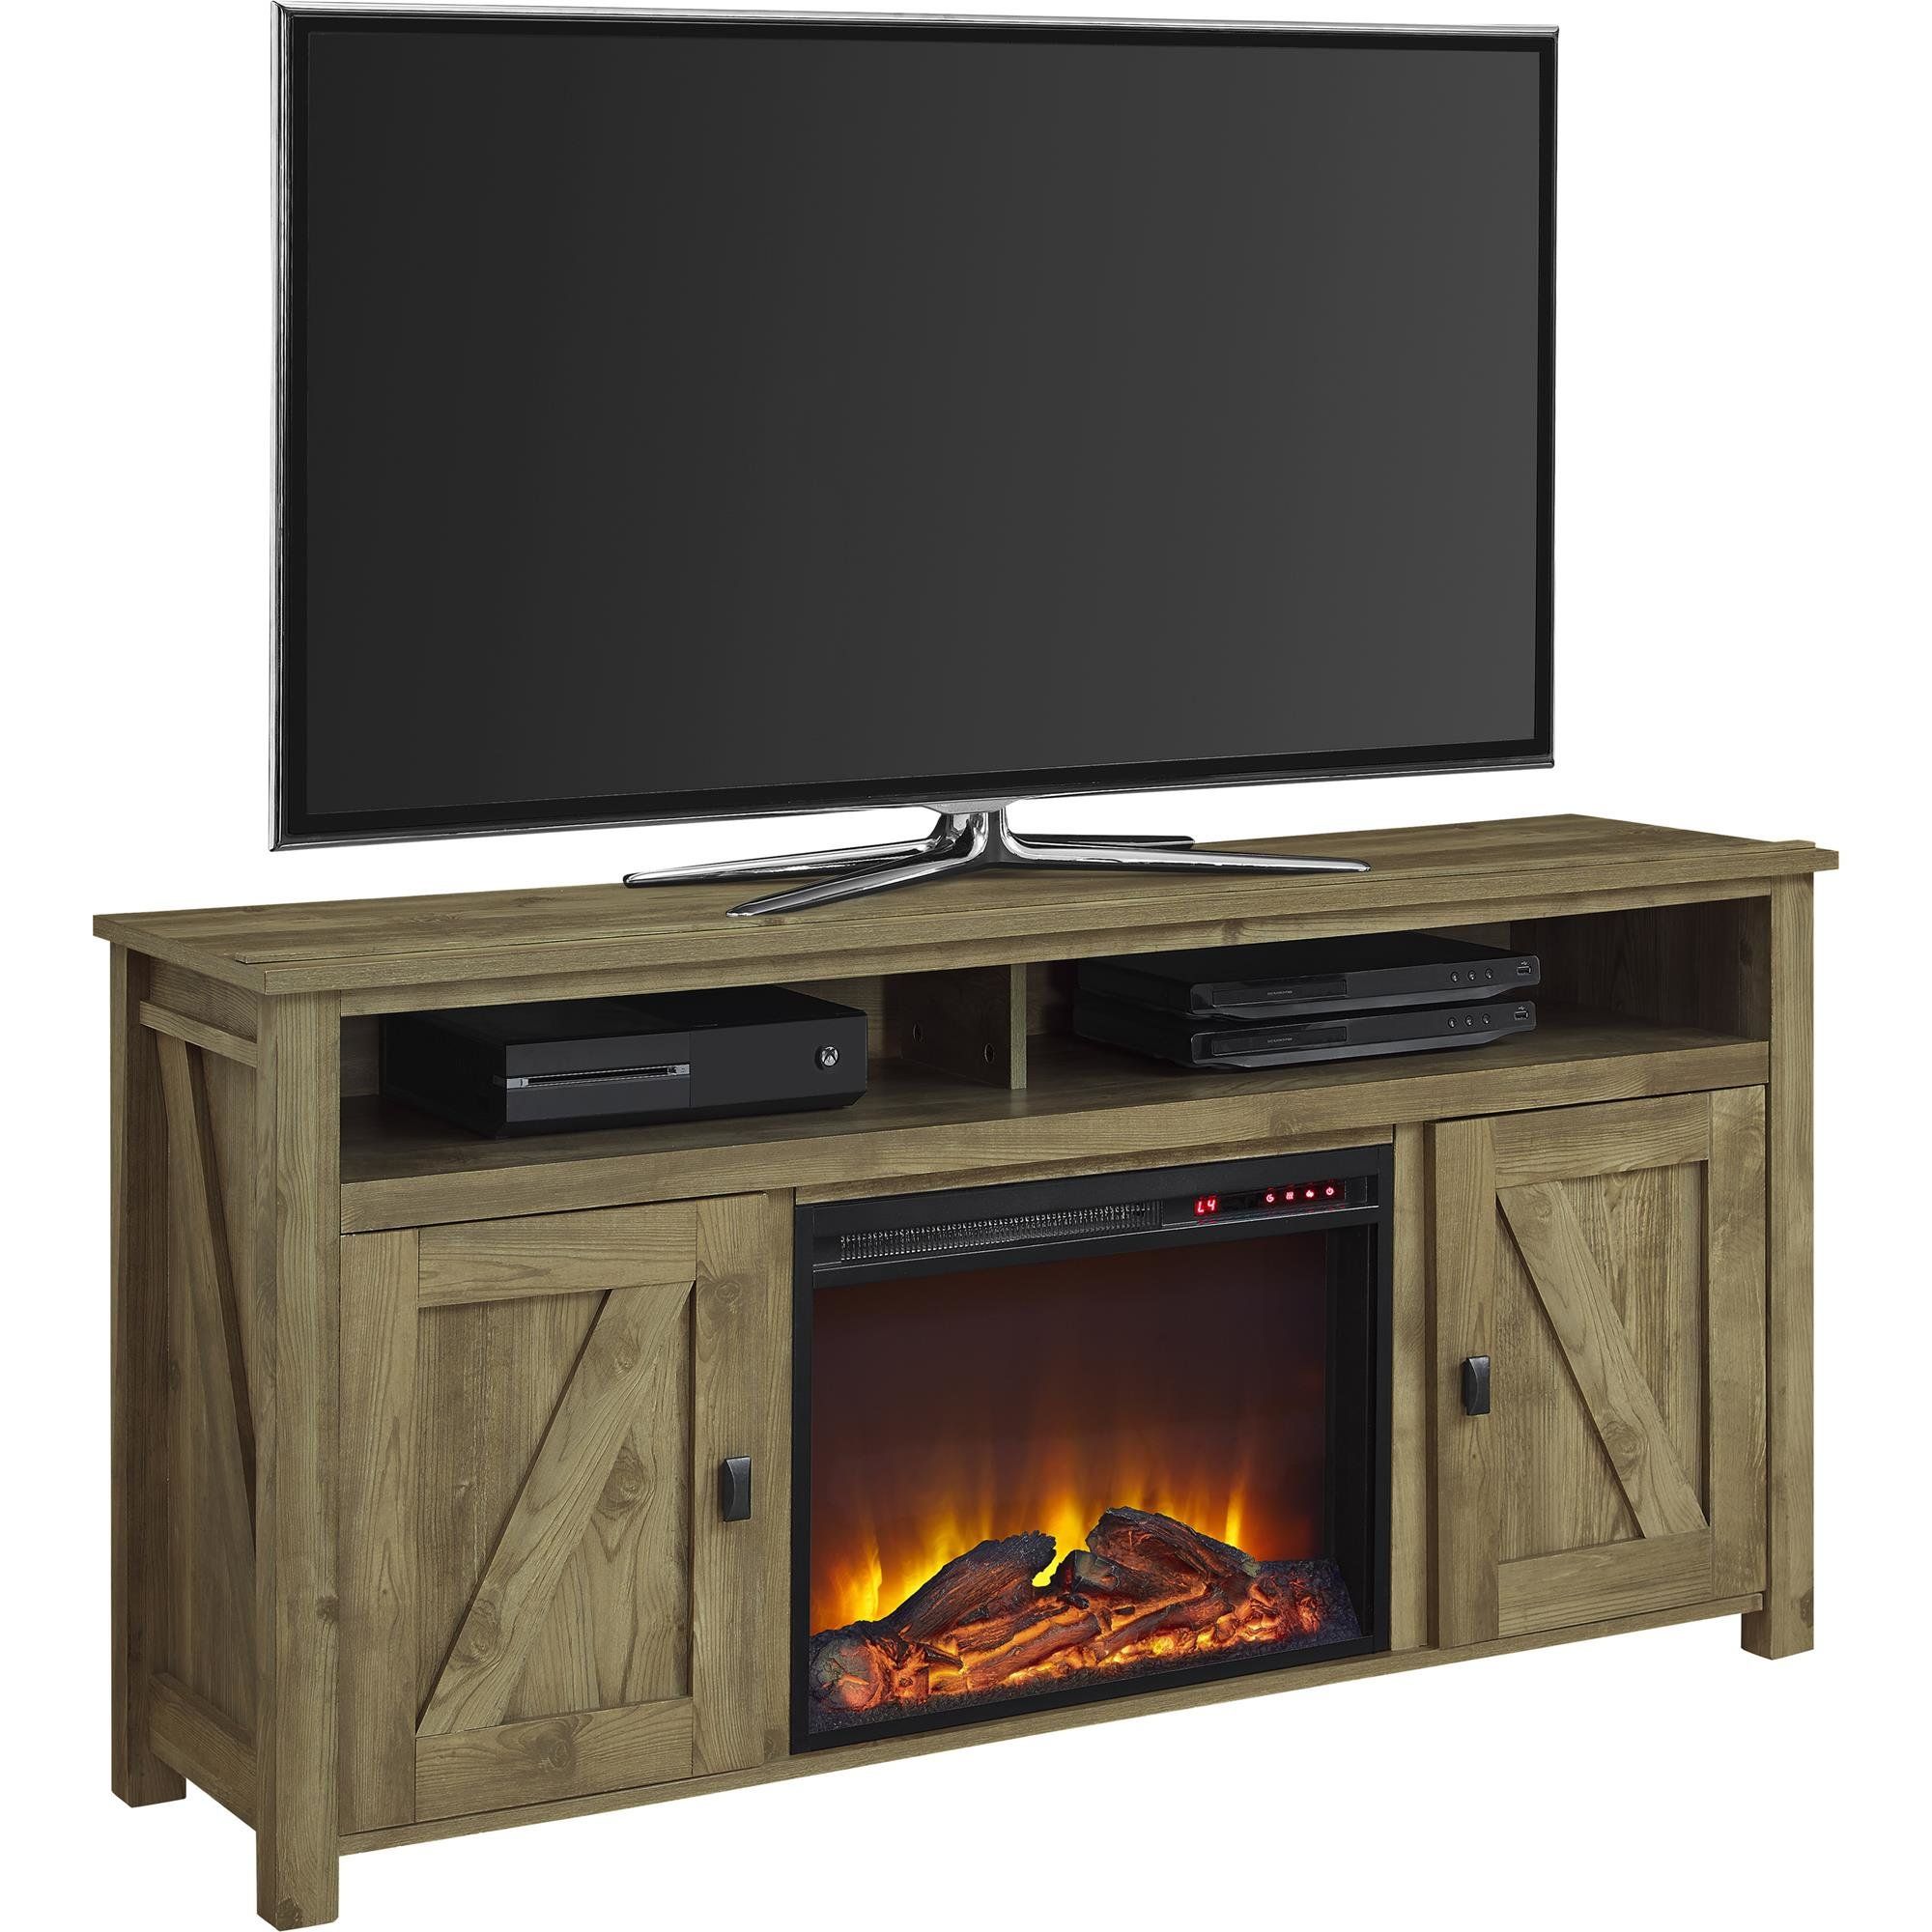 Whittier Tv Stand For Tvs Up To 60" With Fireplace & Reviews | Joss With Wyatt 68 Inch Tv Stands (View 28 of 30)